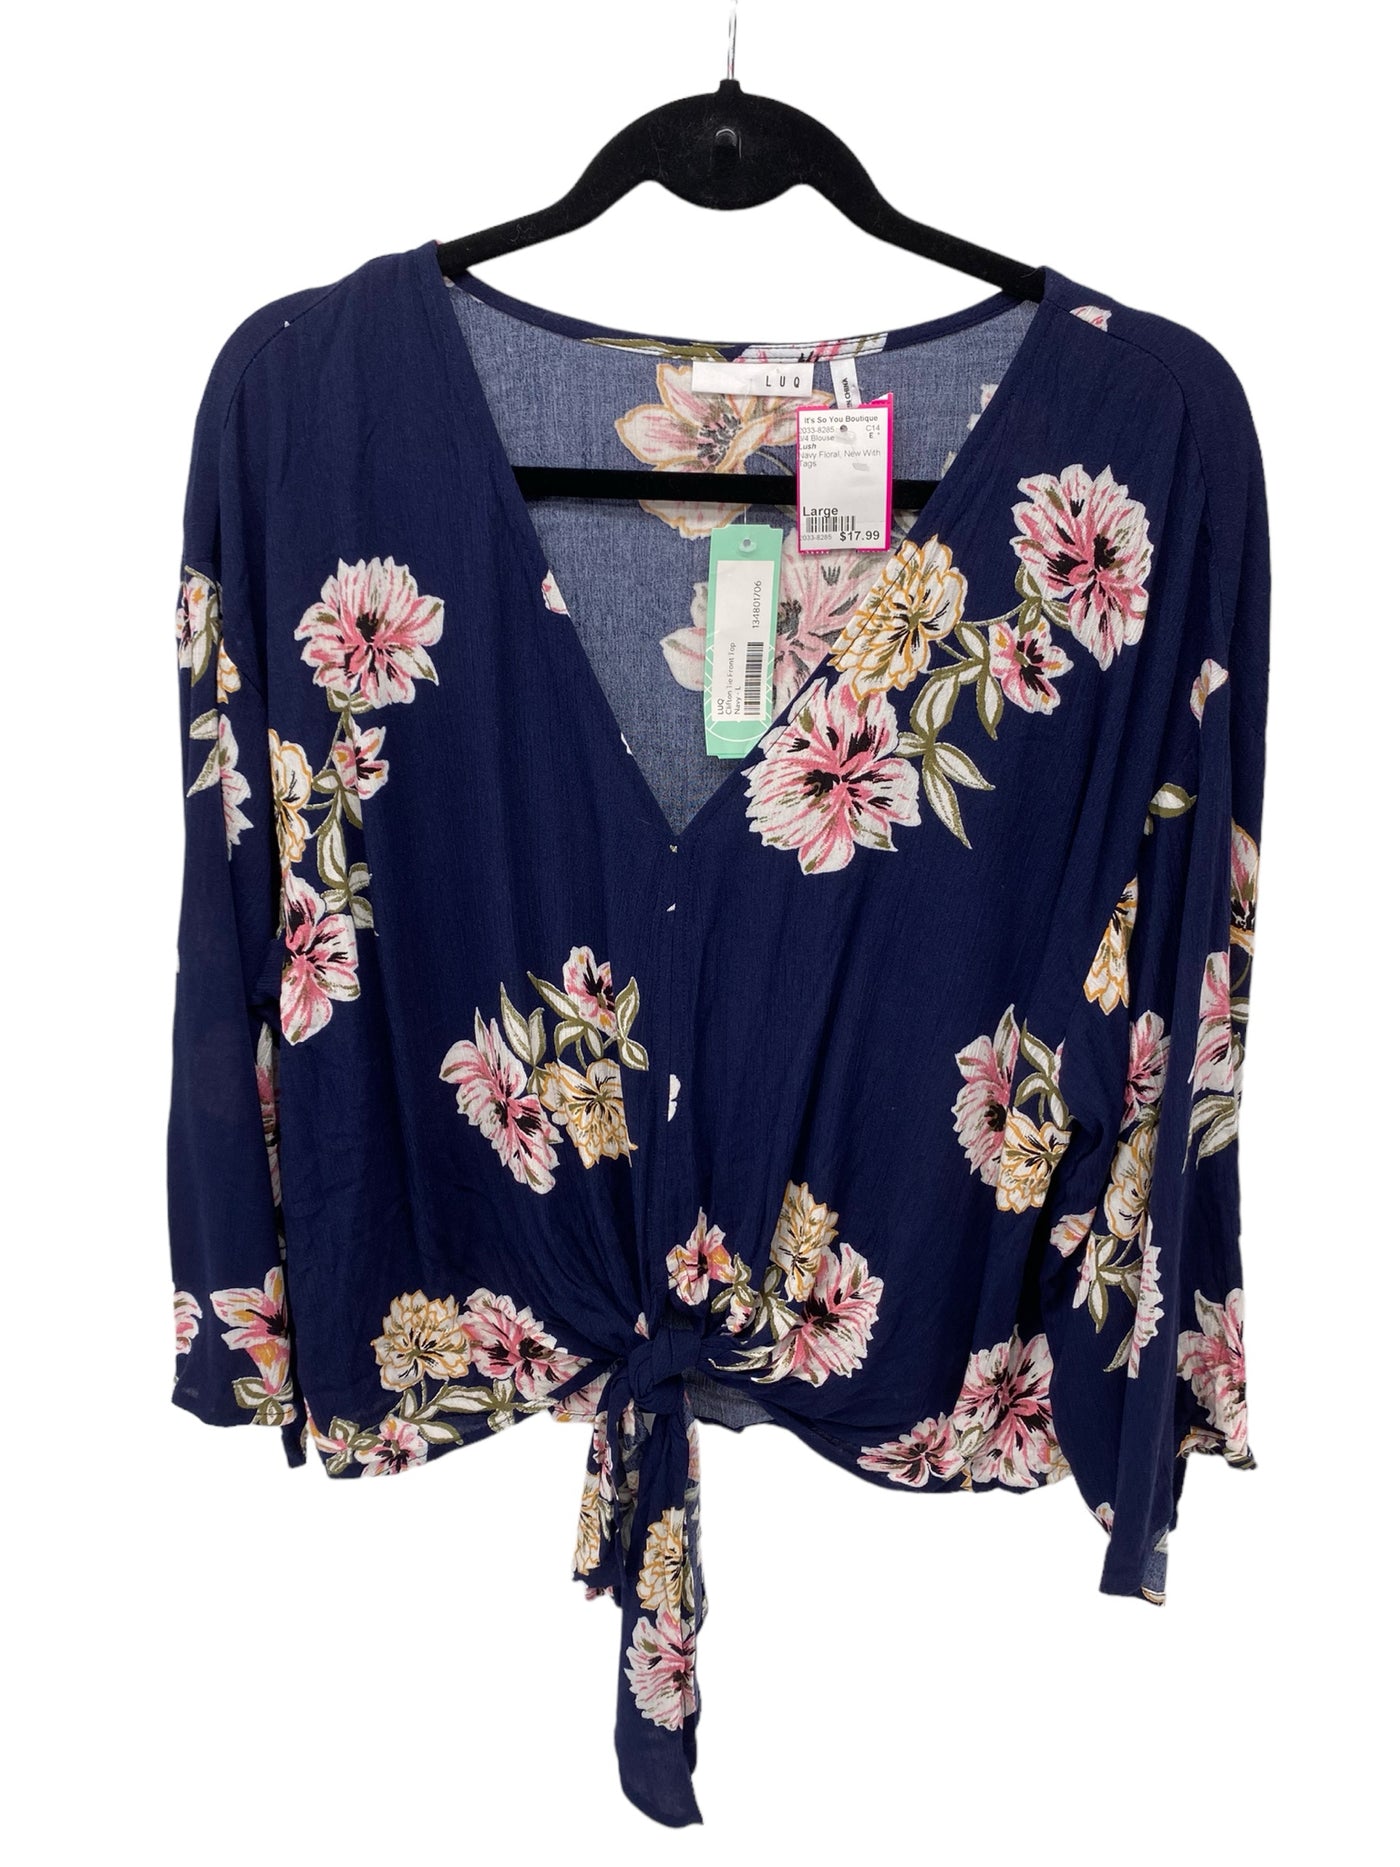 Lush Misses Size Large Navy Floral New With Tags 3/4 Blouse